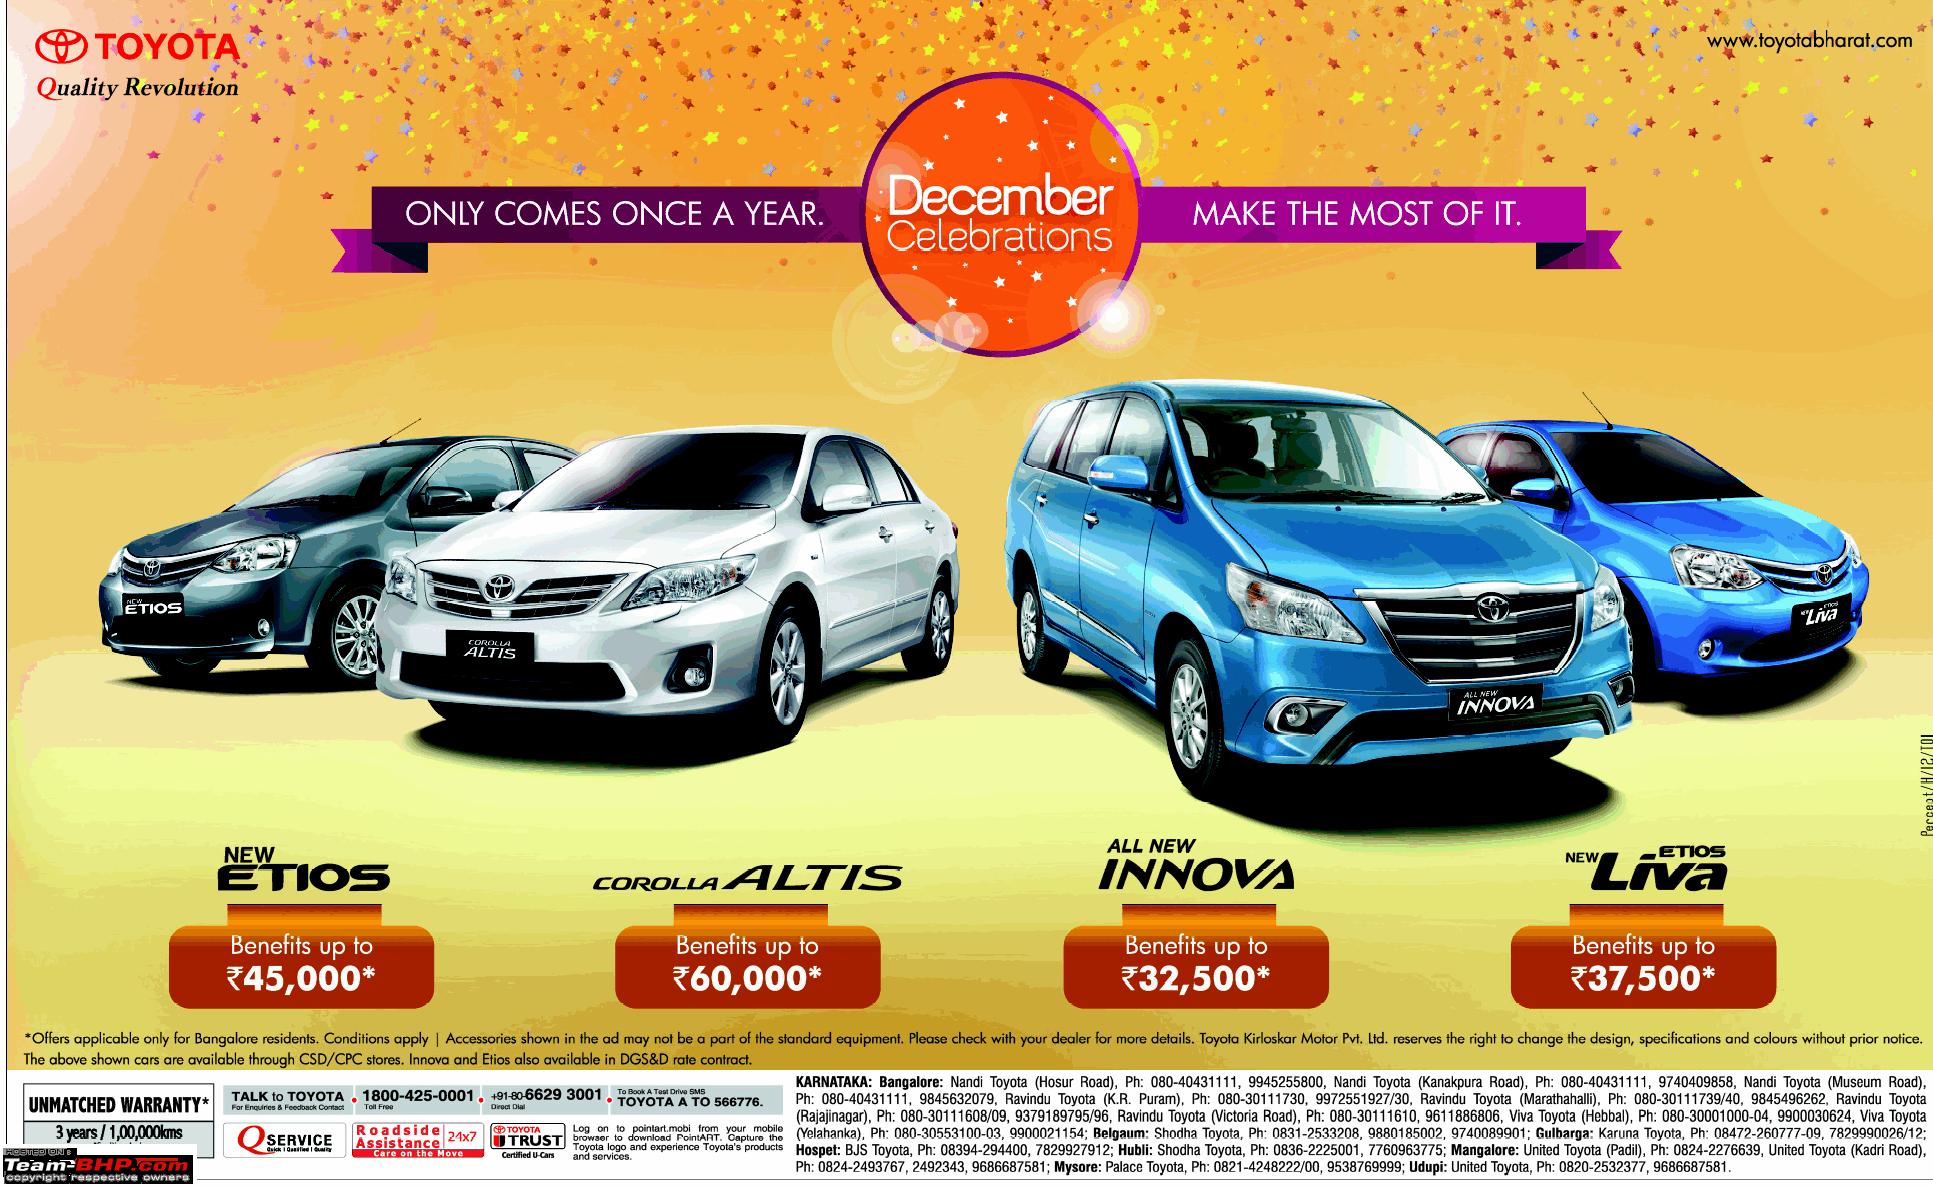 the-new-car-price-check-thread-track-price-changes-discounts